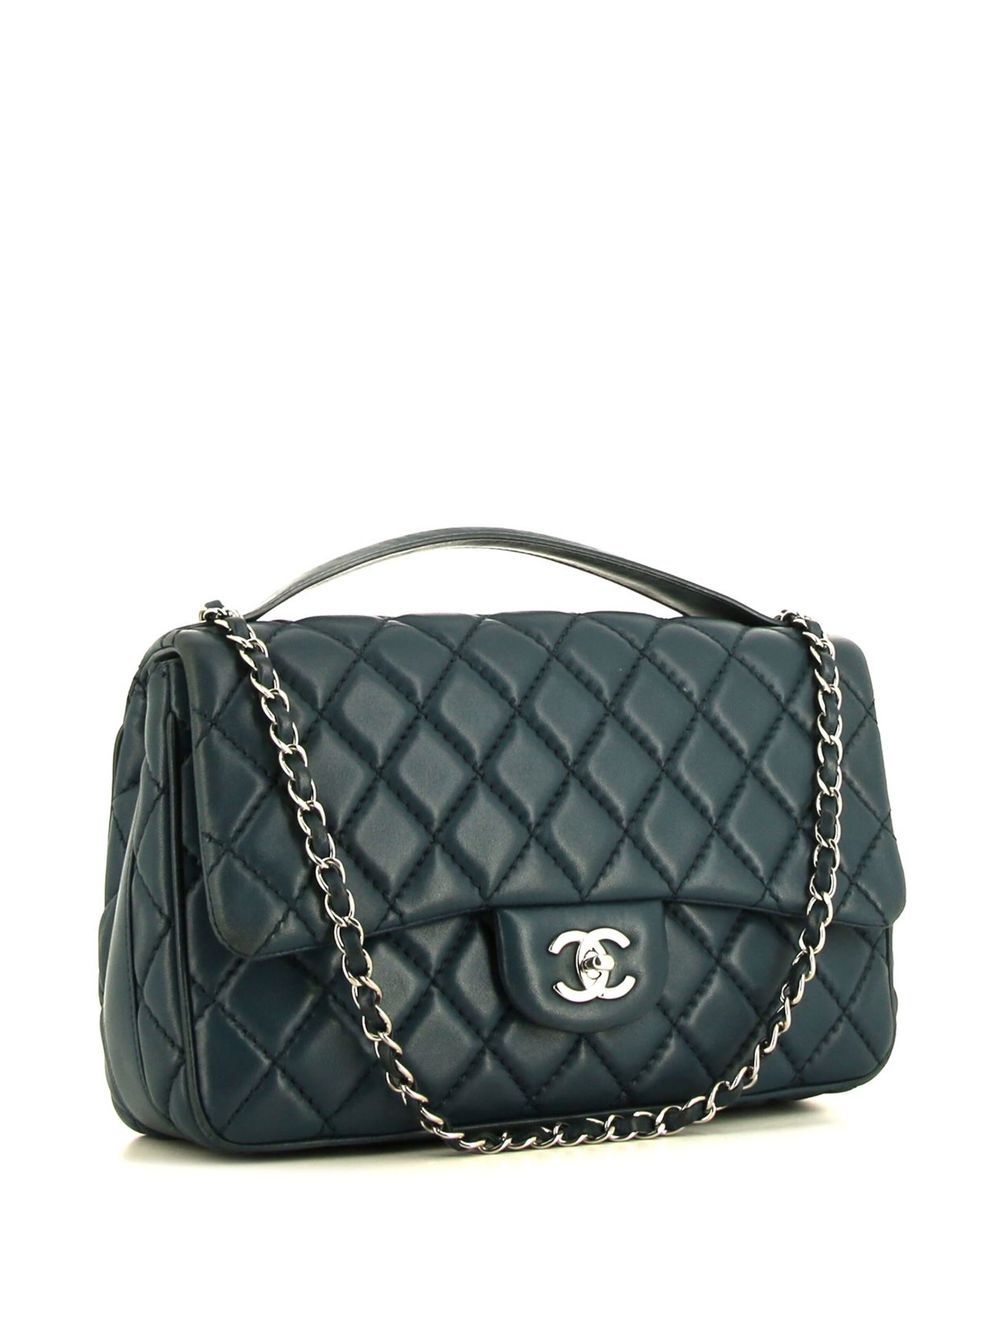 Chanel Pre-owned 1995 Diamond-Quilted CC Heart Handbag